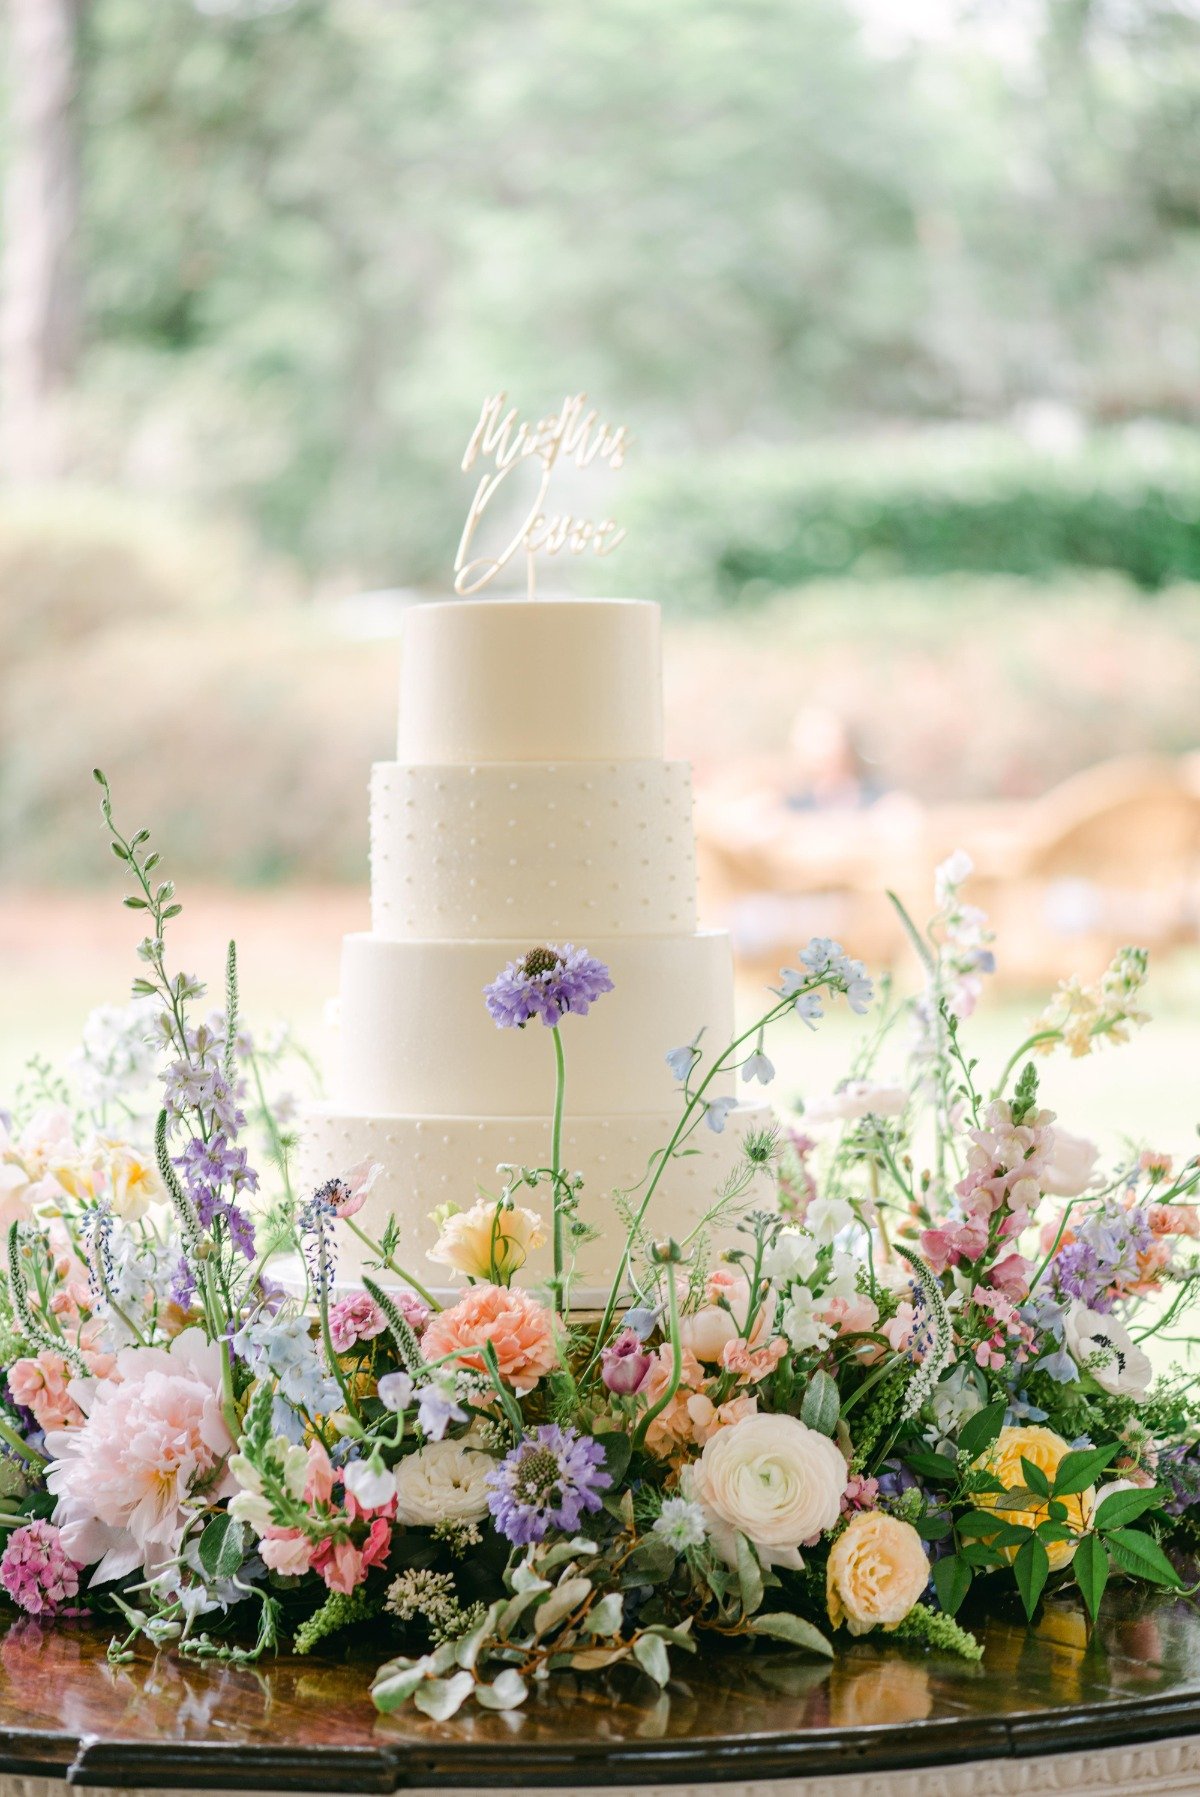 Wedding cake with cake topper and surrounded by spring flowers